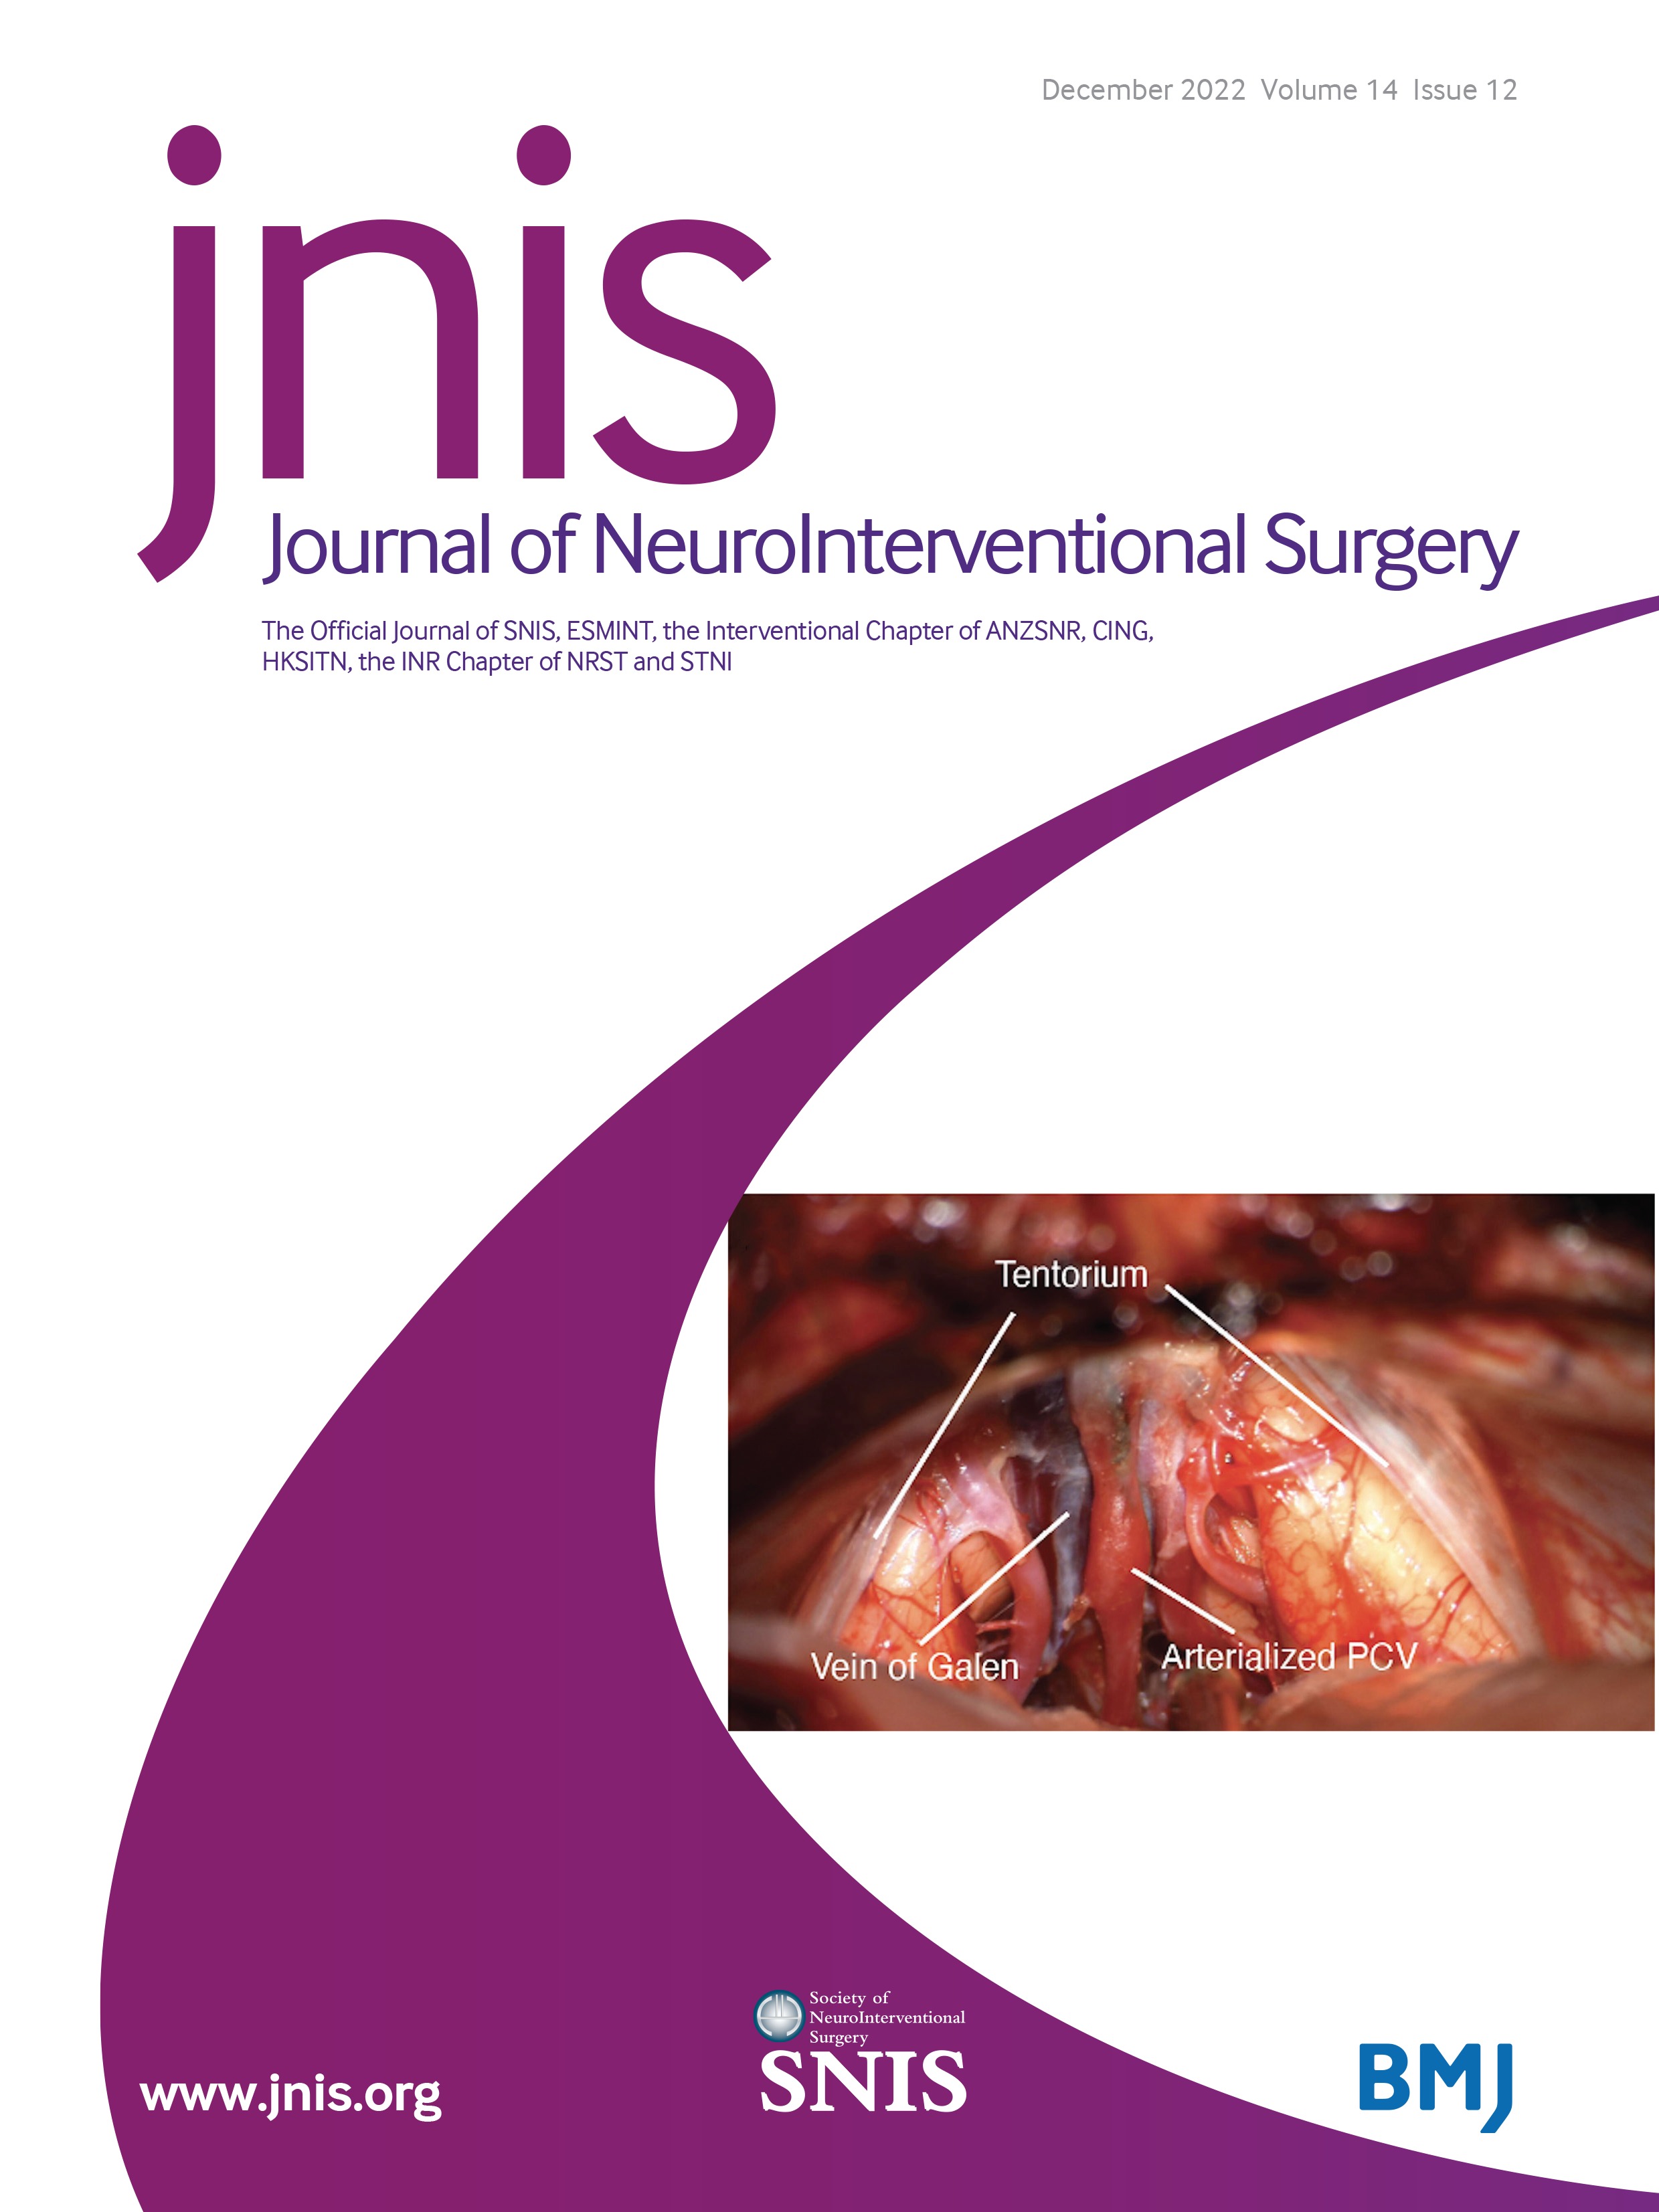 Effect of early Sanguinate (PEGylated carboxyhemoglobin bovine) infusion on cerebral blood flow to the ischemic core in experimental middle cerebral artery occlusion